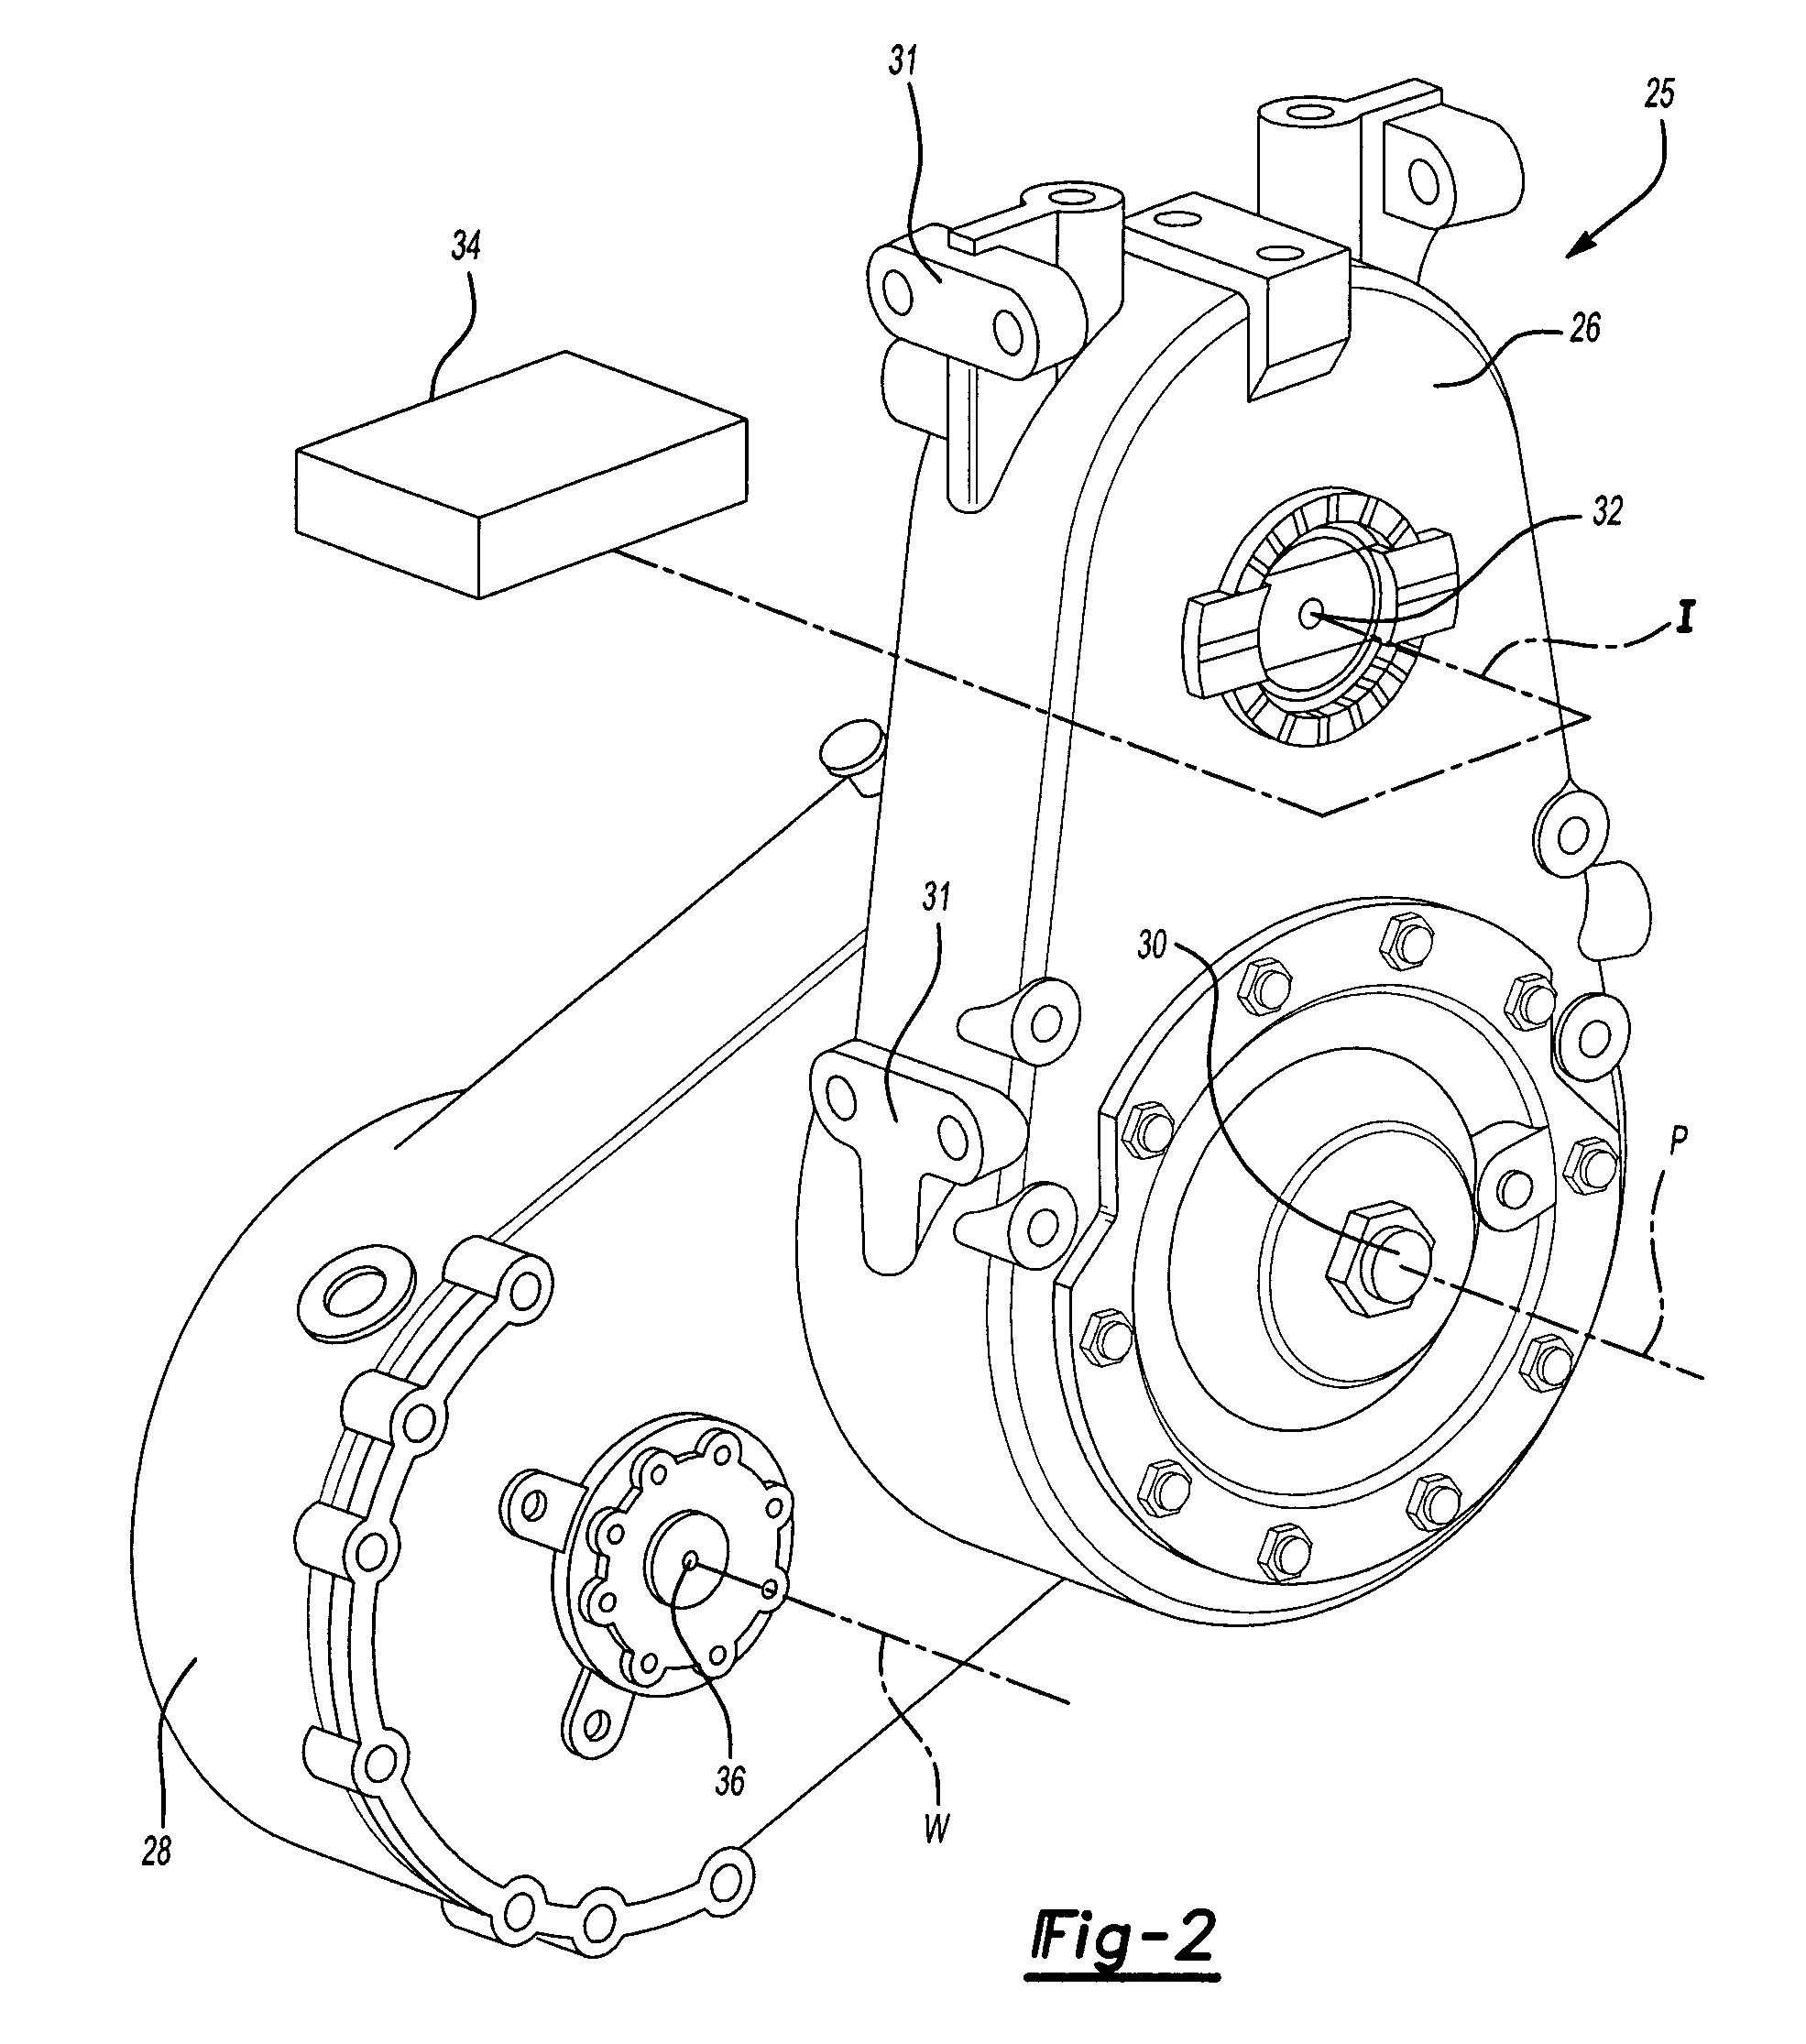 Drive assembly for a high ground clearance vehicle